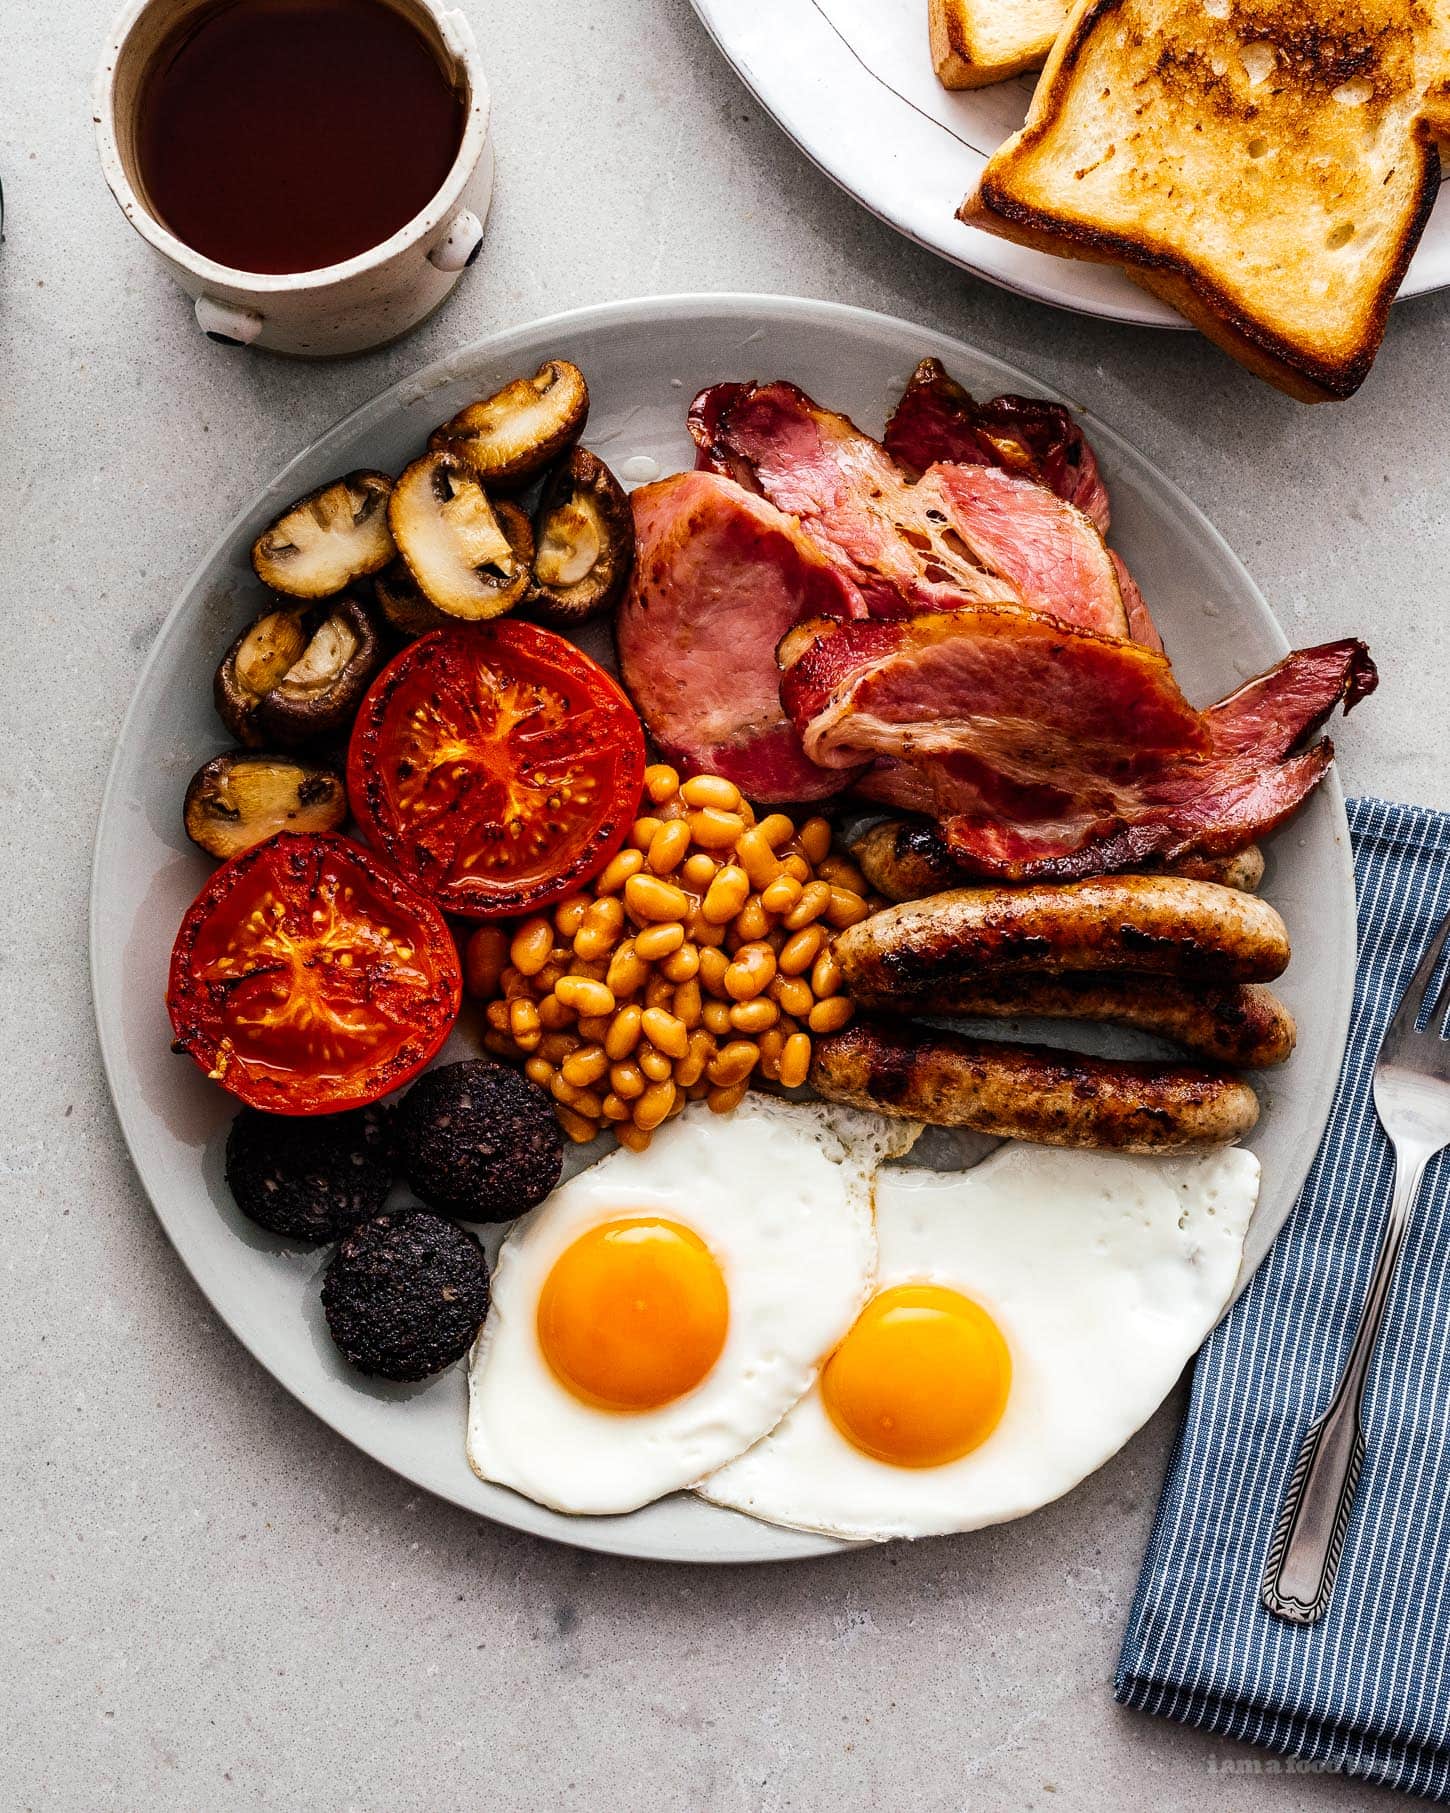 What Is A Full English Breakfast Slang